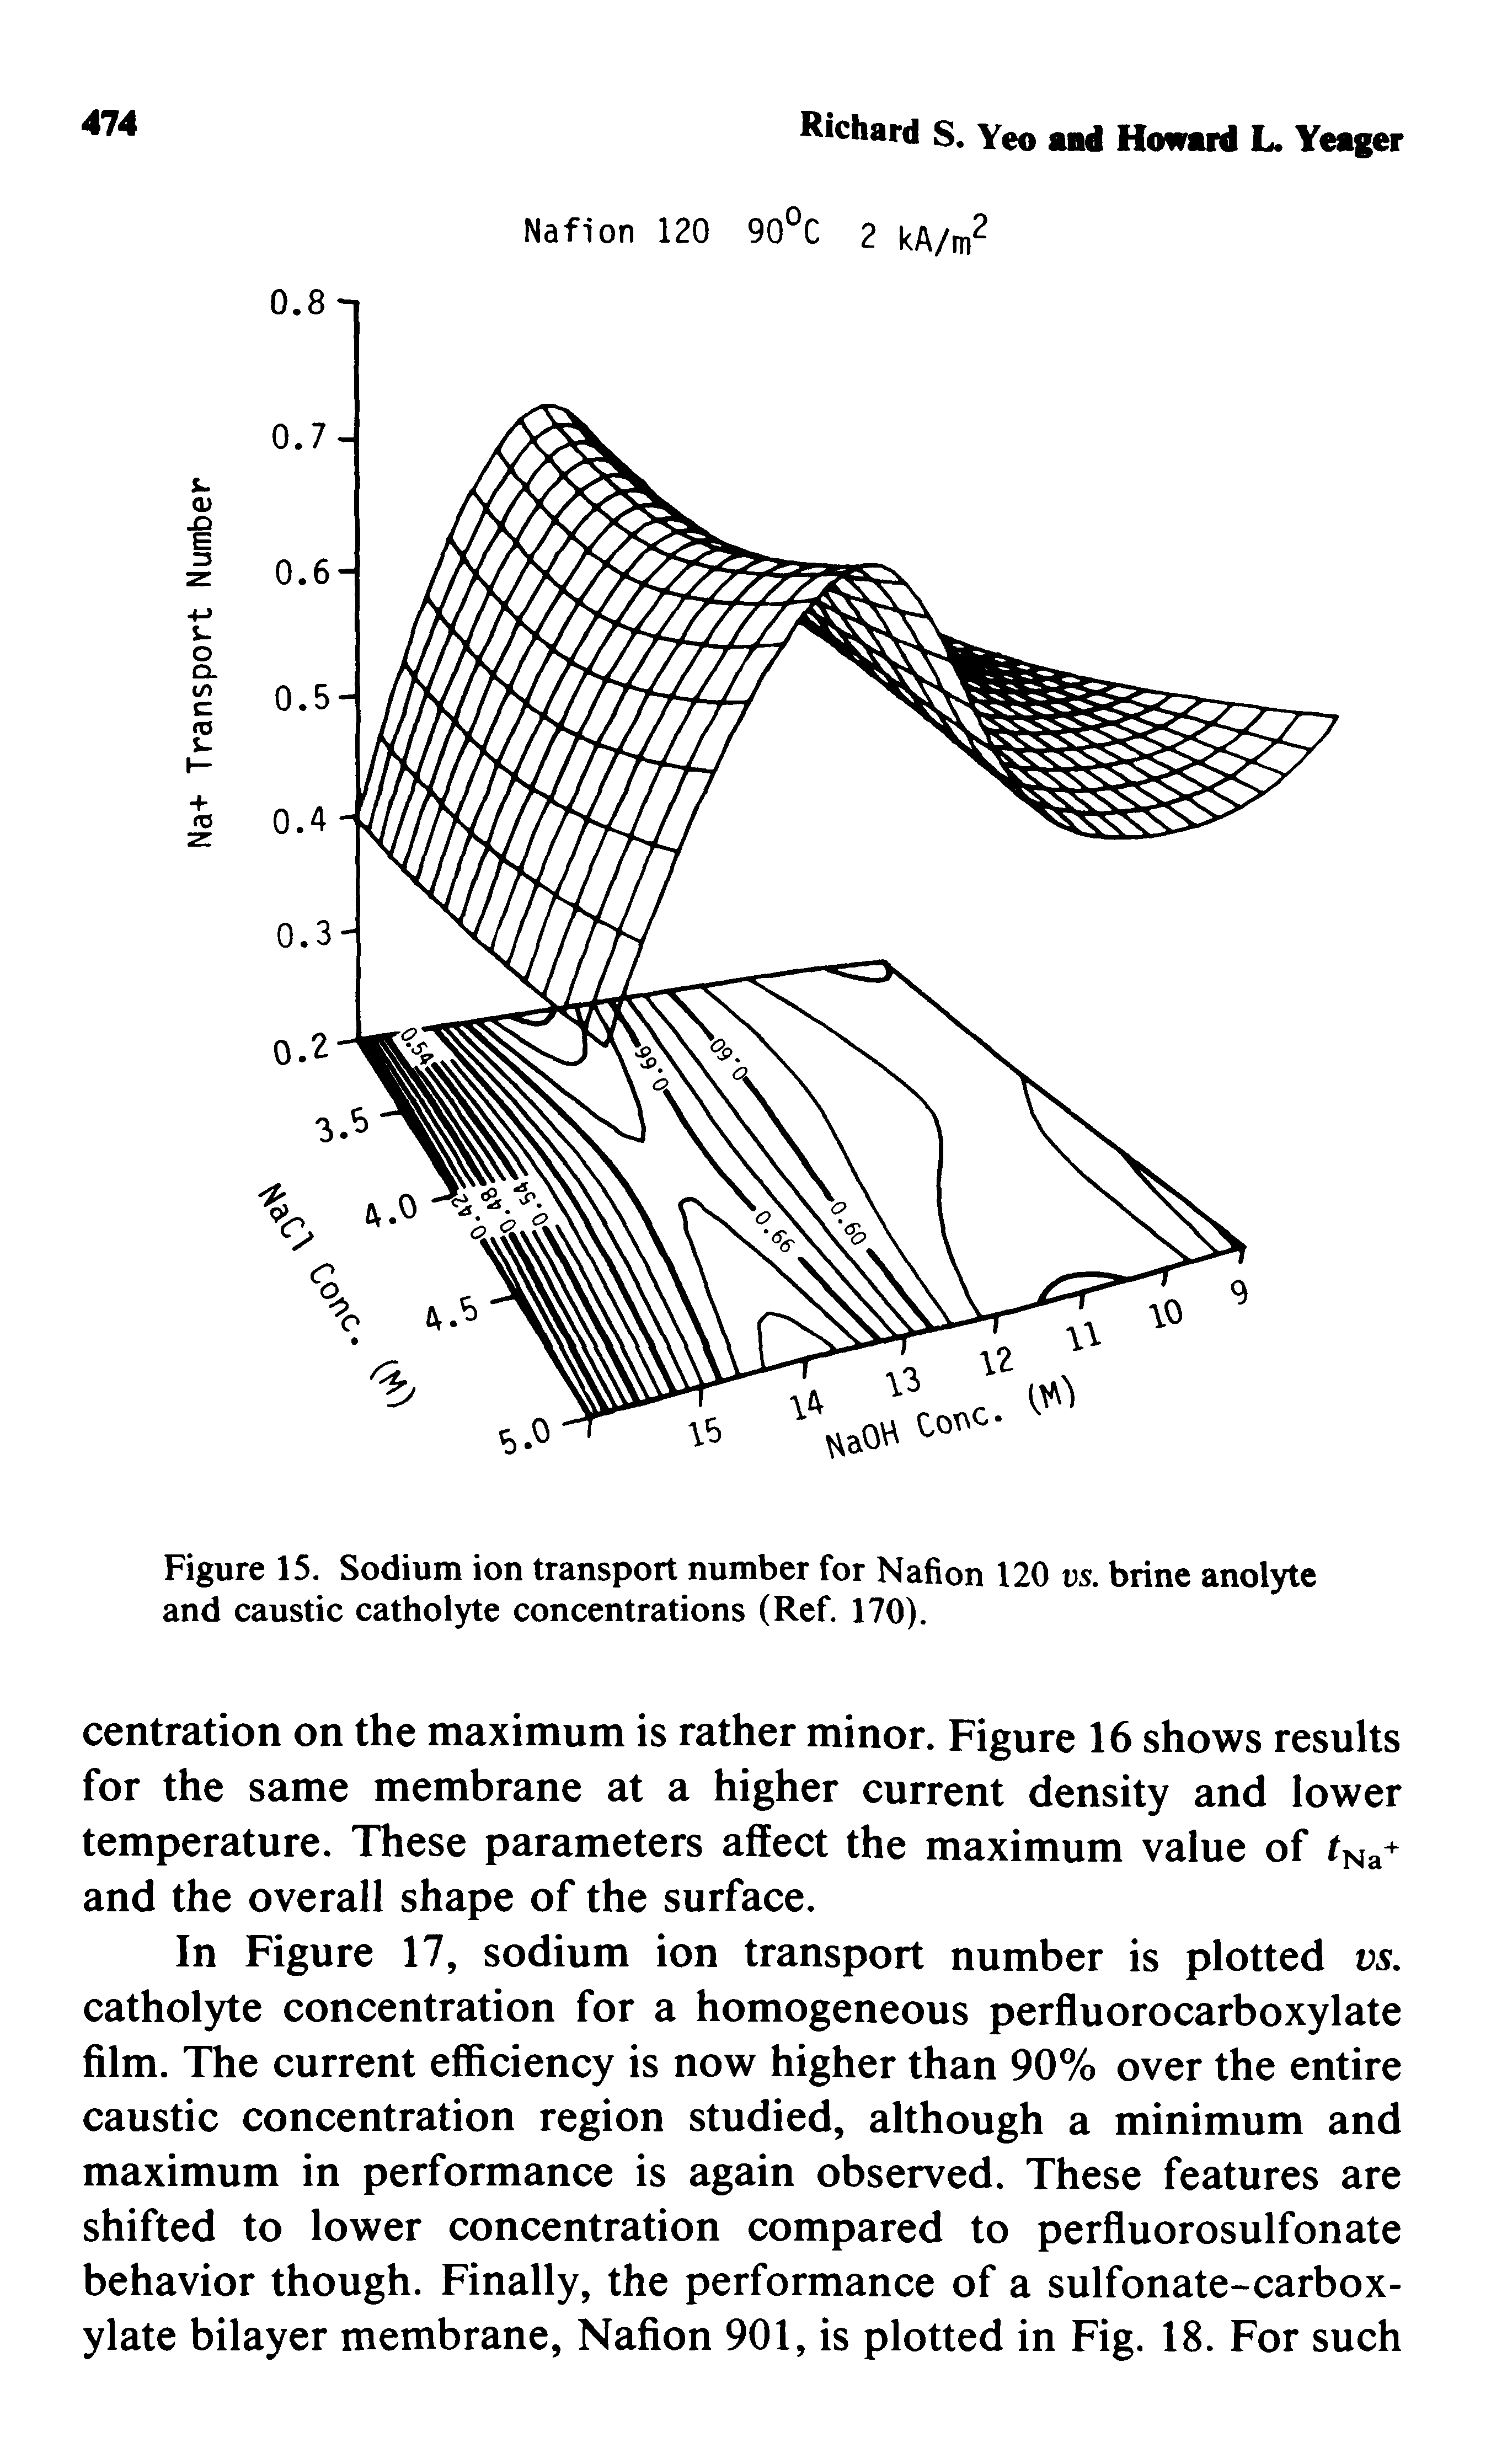 Figure 15. Sodium ion transport number for Nafion 120 us. brine anolyte and caustic catholyte concentrations (Ref. 170).